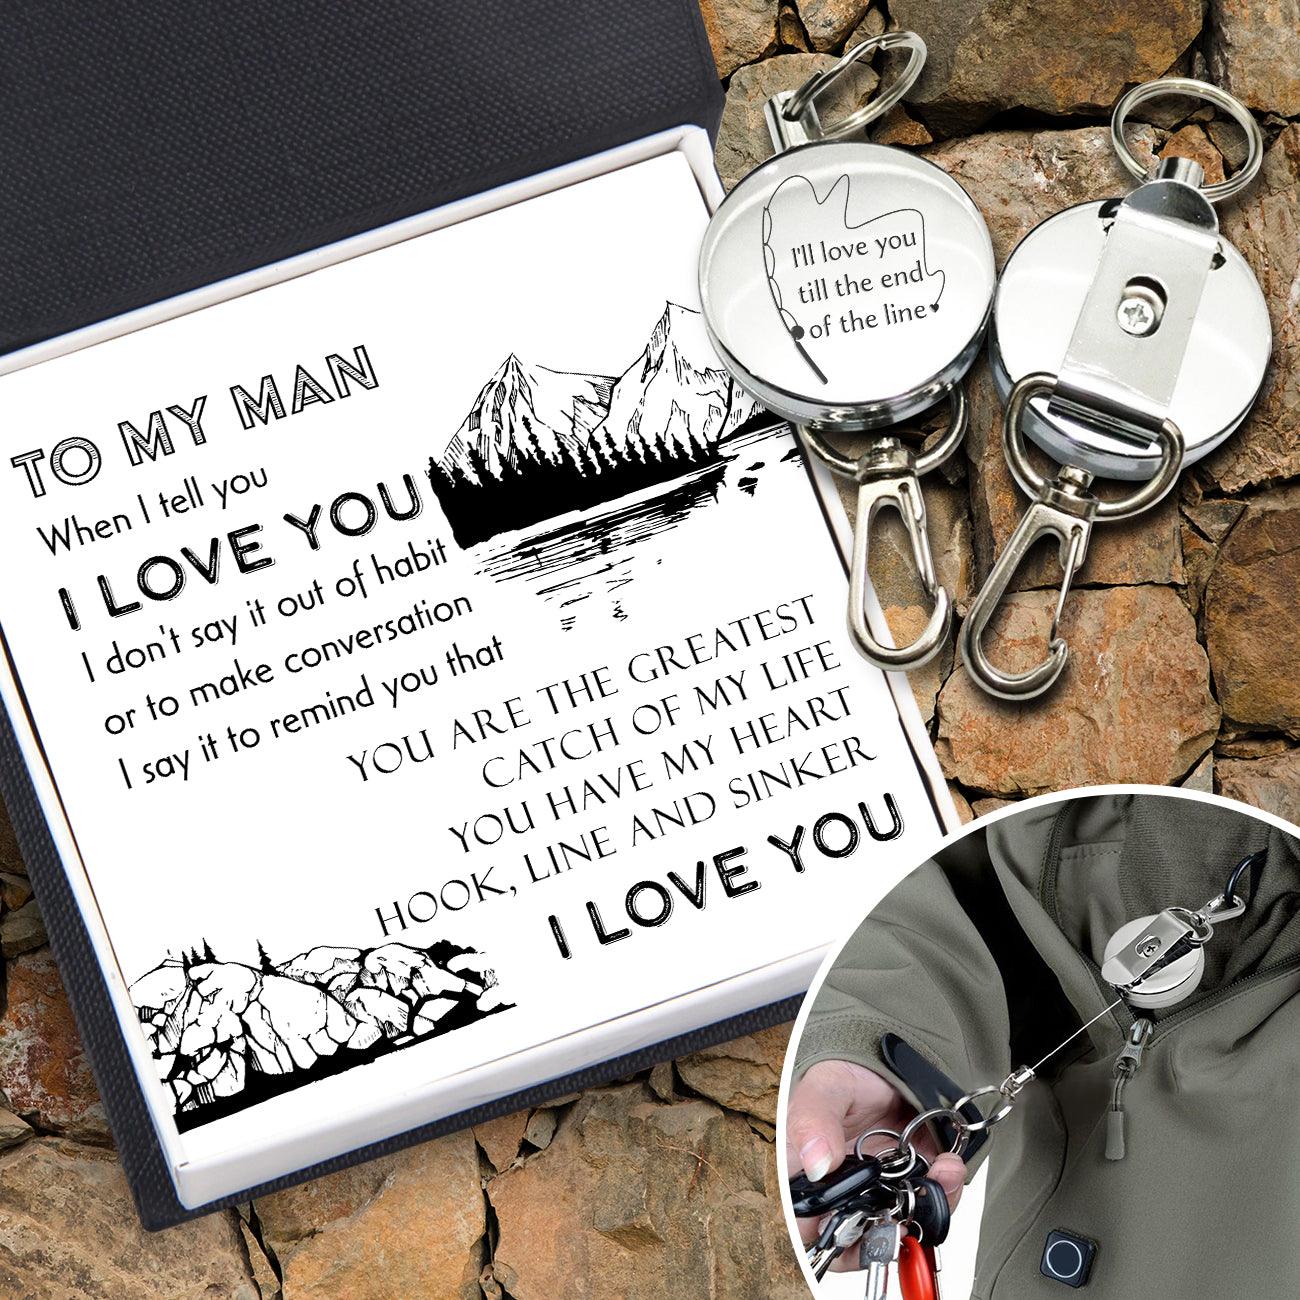 Retractable Pull Keychain - Fishing - To My Man - The Greatest Catch - Augkze26002 - Gifts Holder